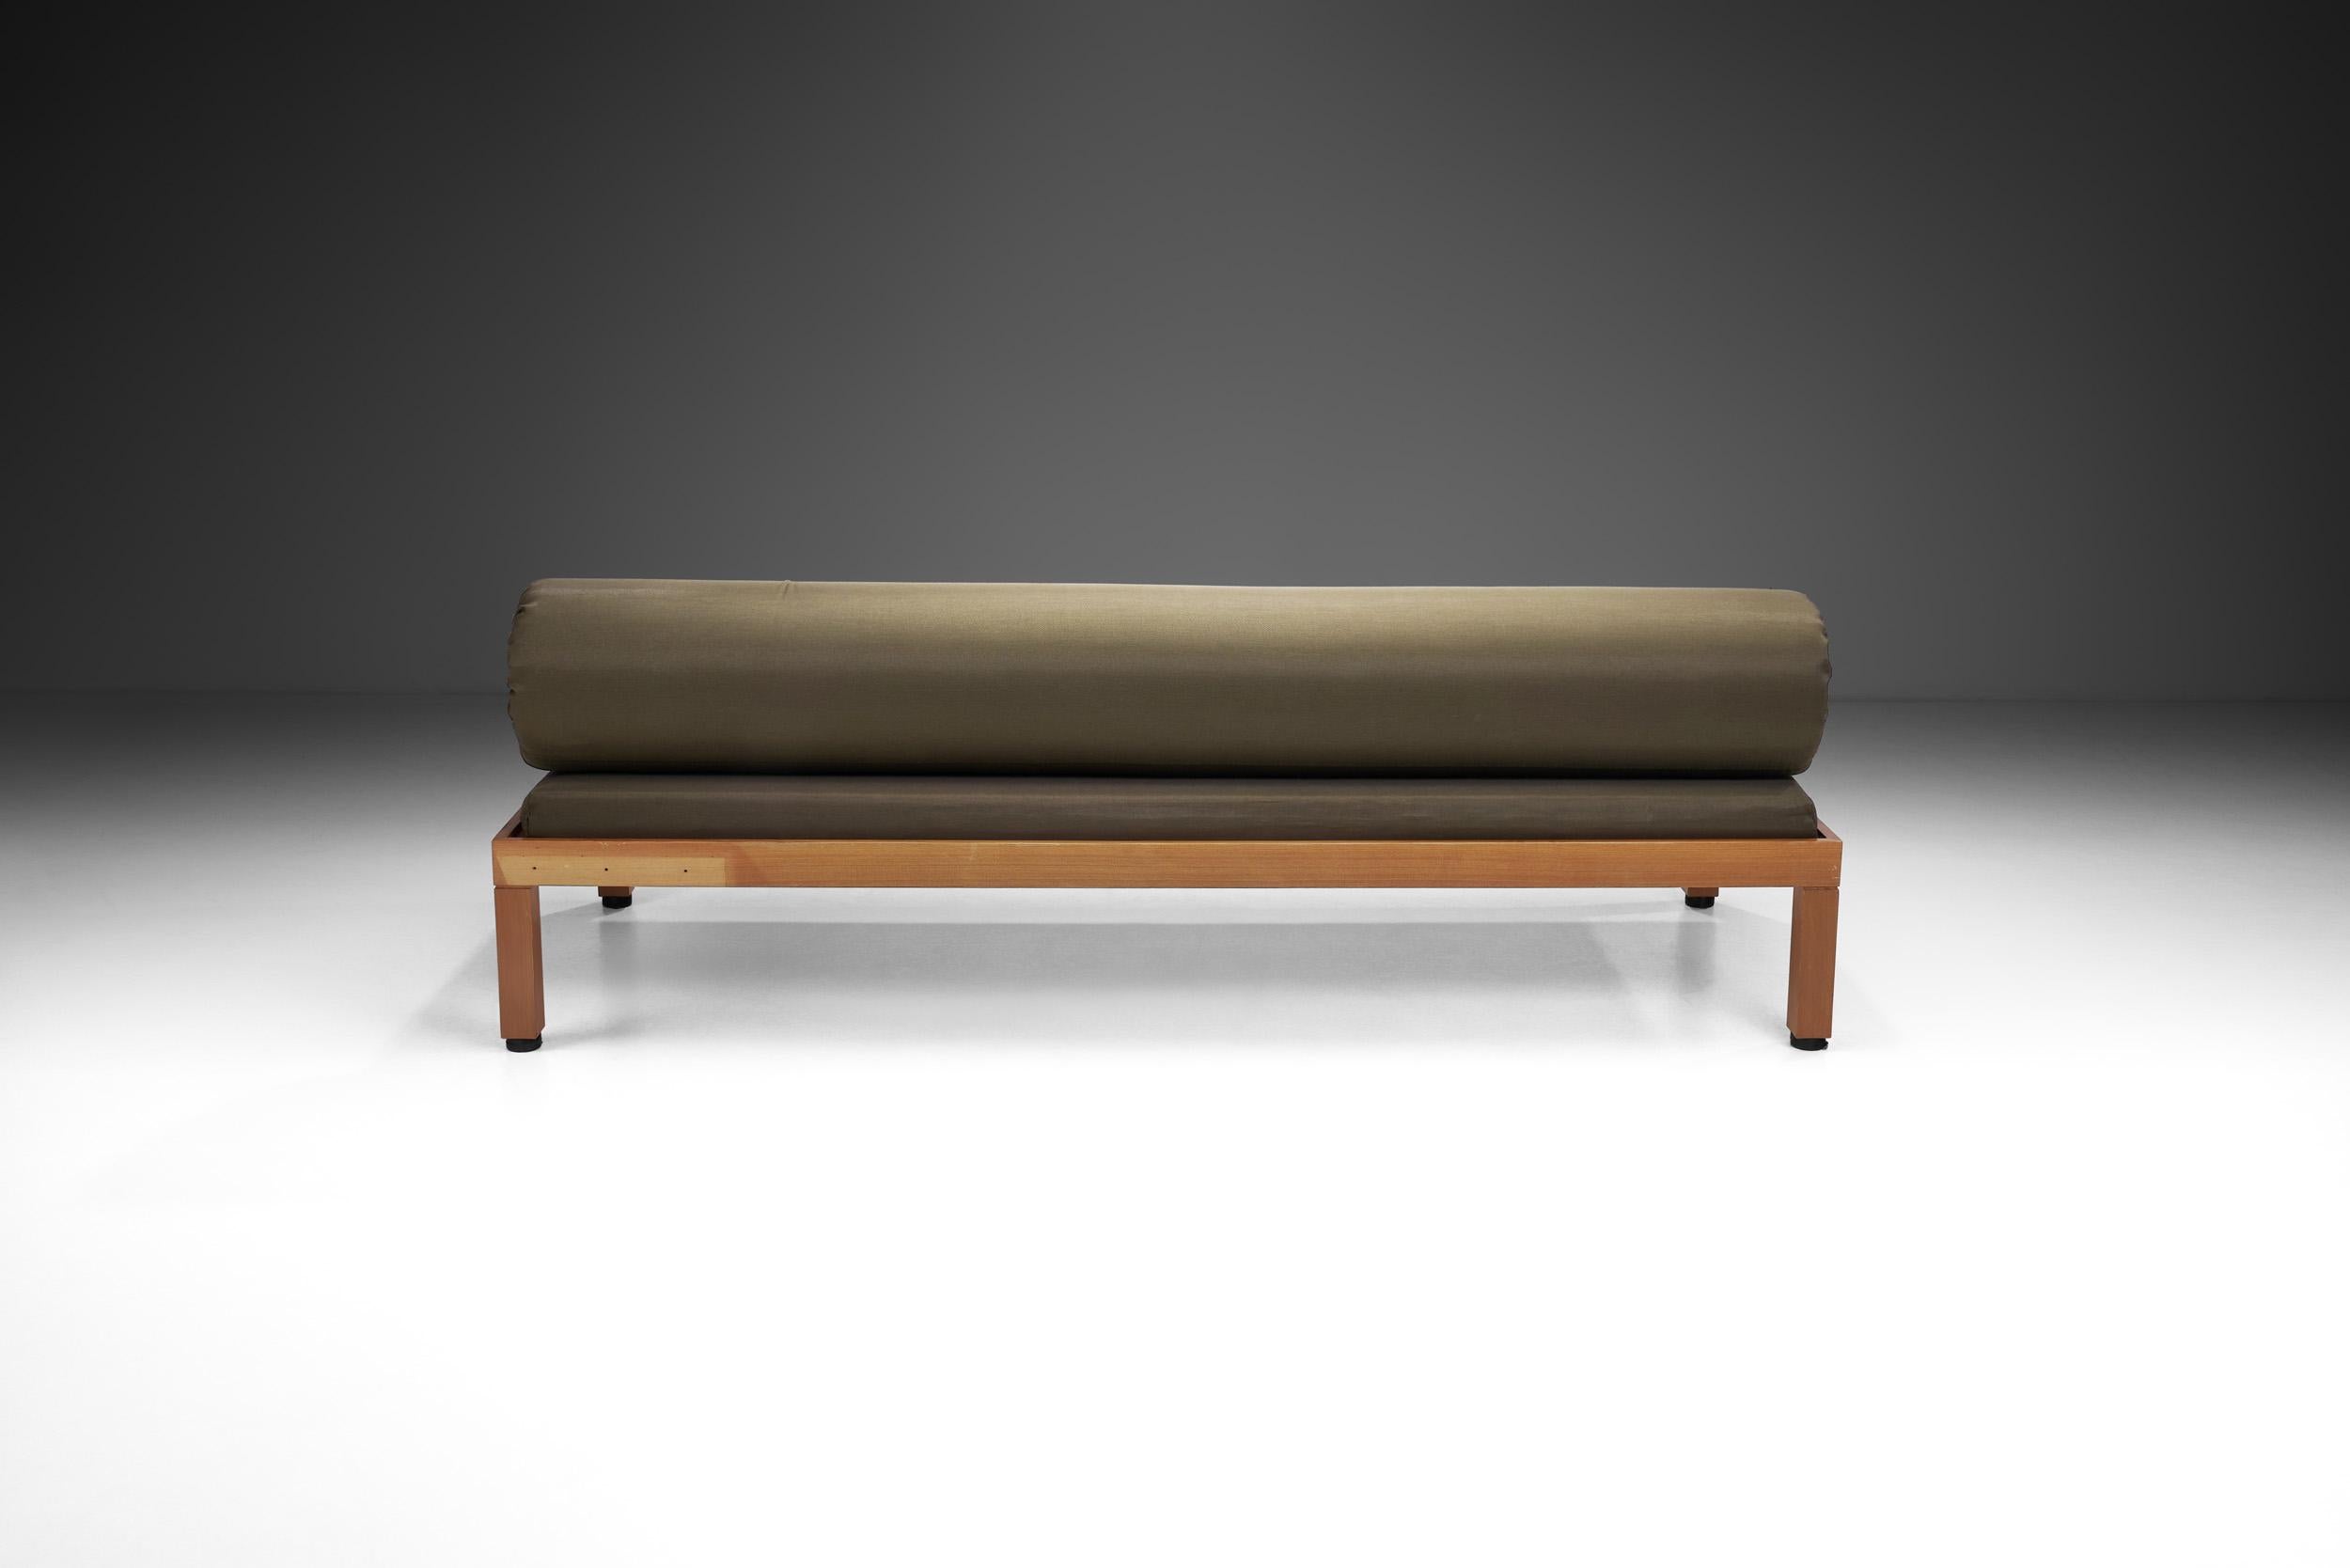 Mid-Century Modern A Haroma, Saarinen, and Salo Design Collaboration Daybed, Finland 1960 For Sale